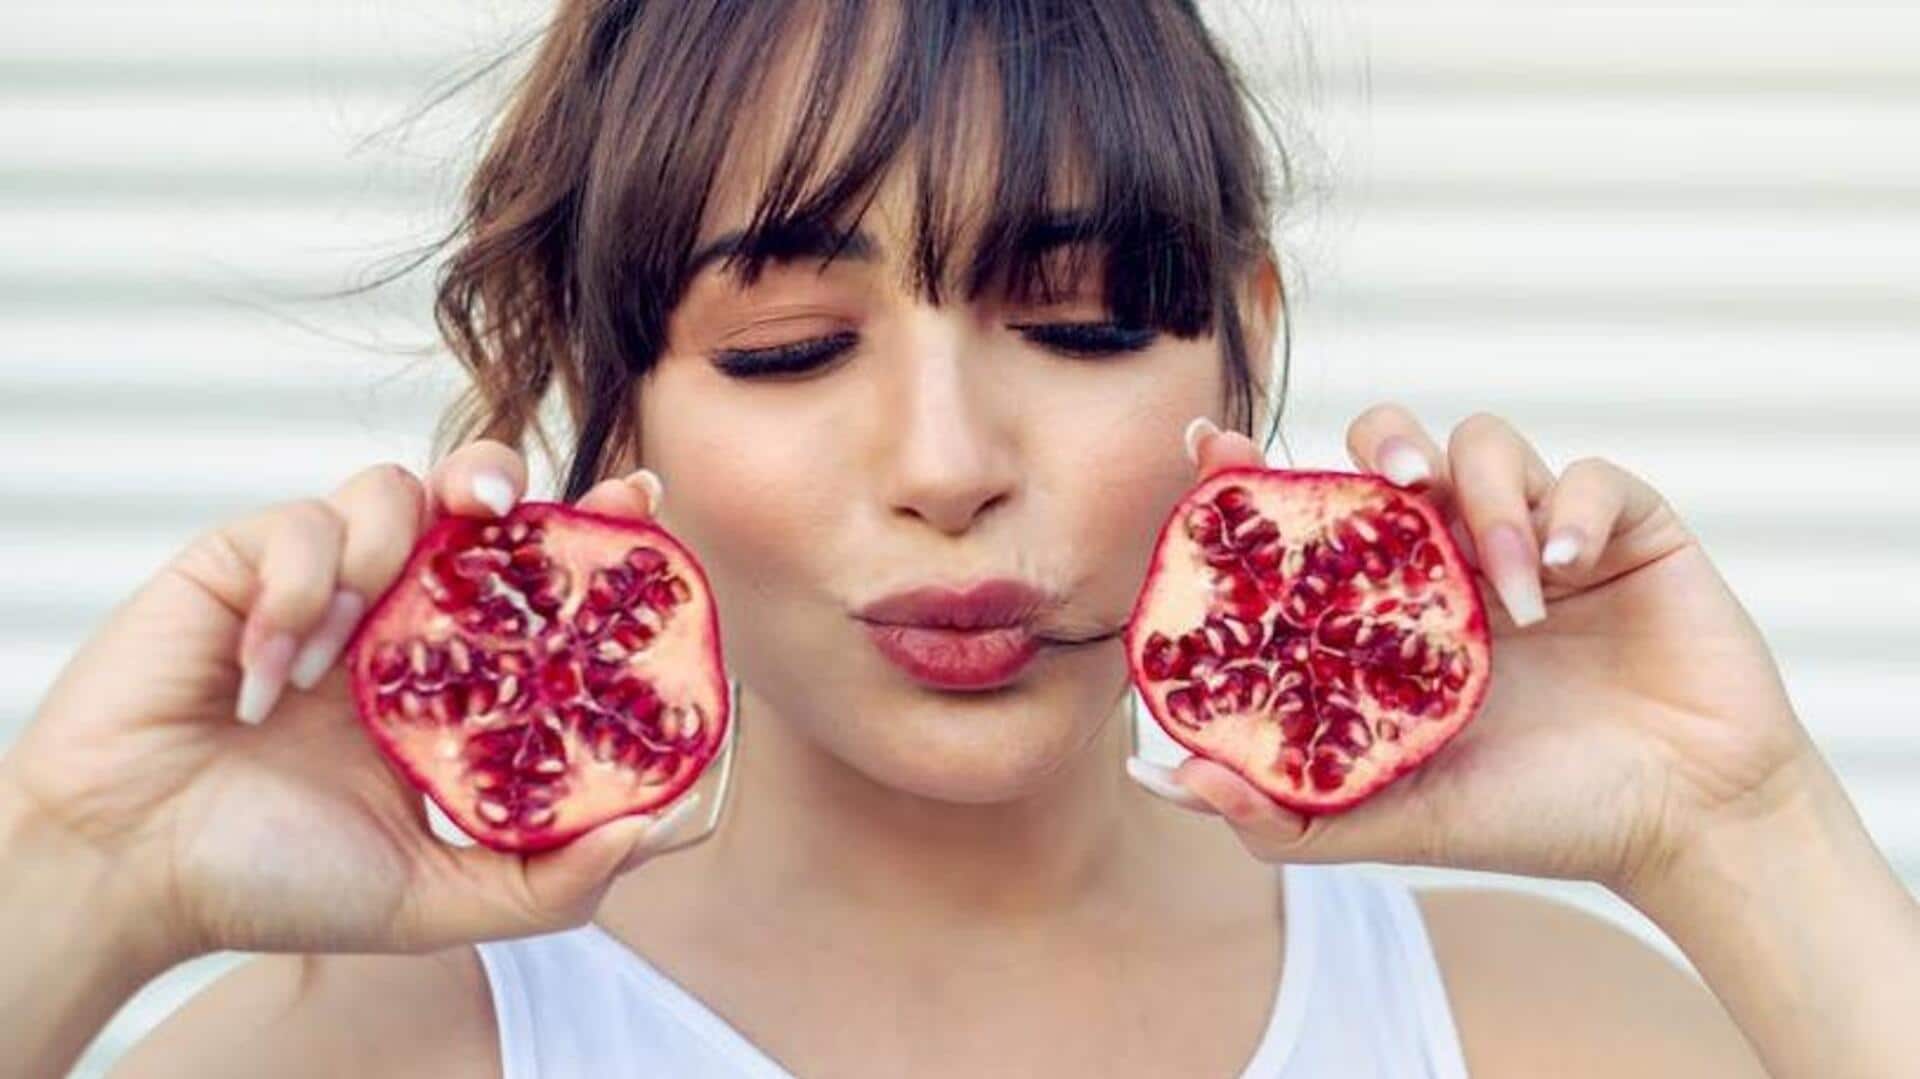 Fruity wonders: 5 fruits that are perfect for skin exfoliation